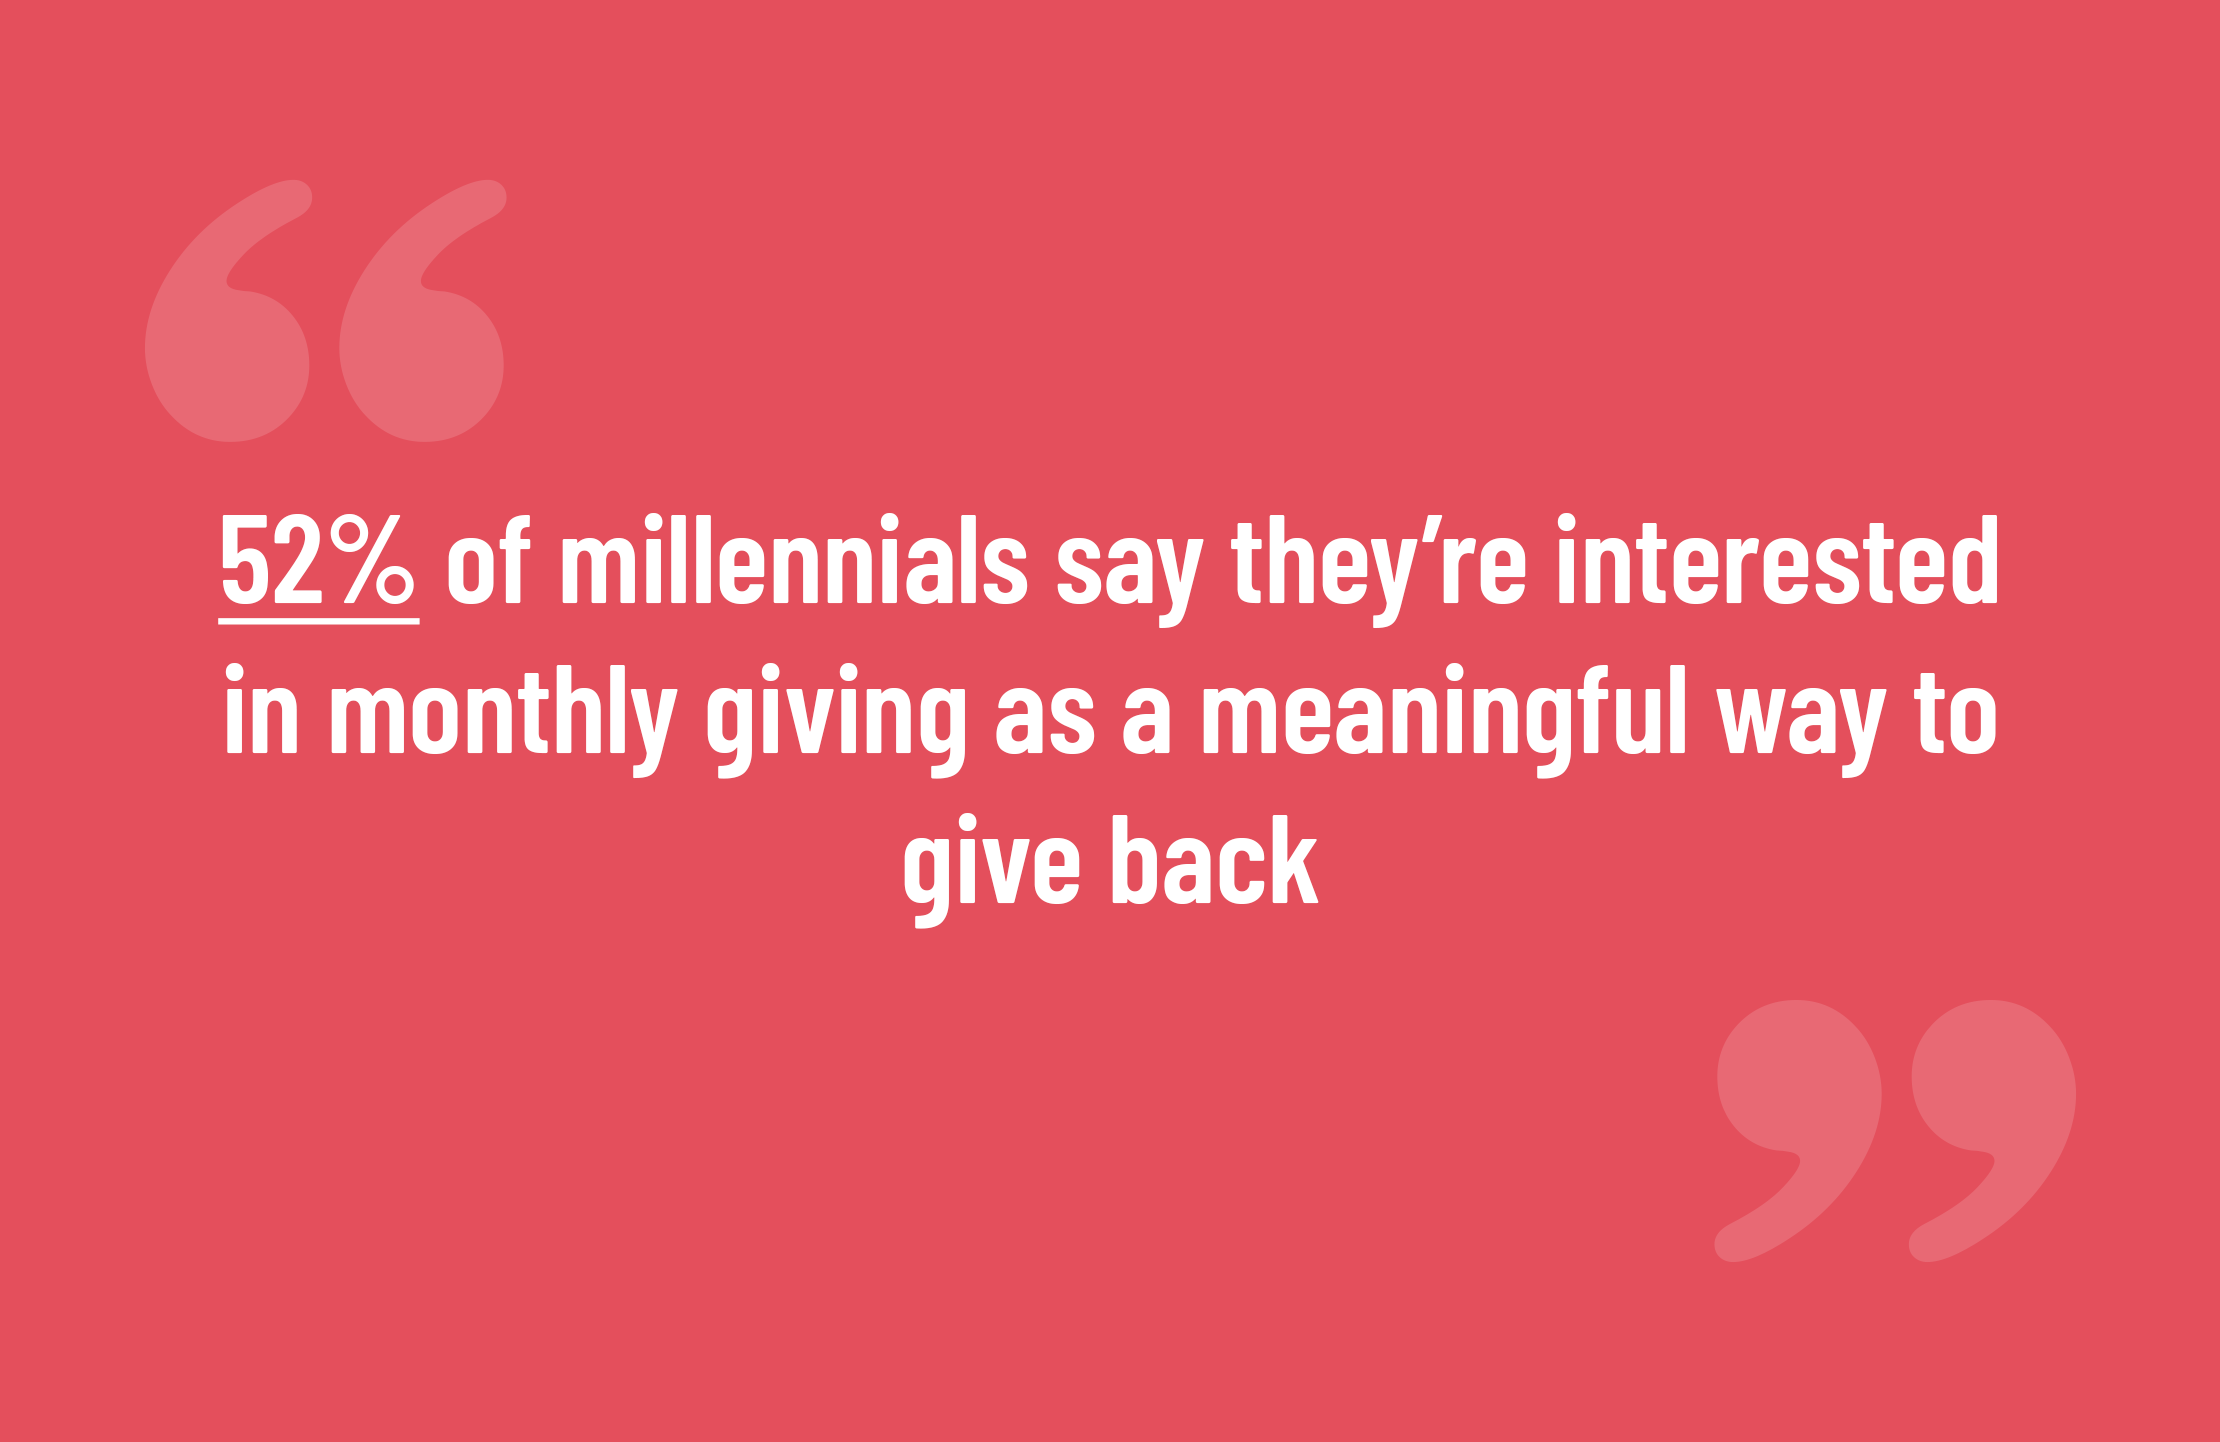 52% of millennials say they’re interested in monthly giving as a meaningful way to give back